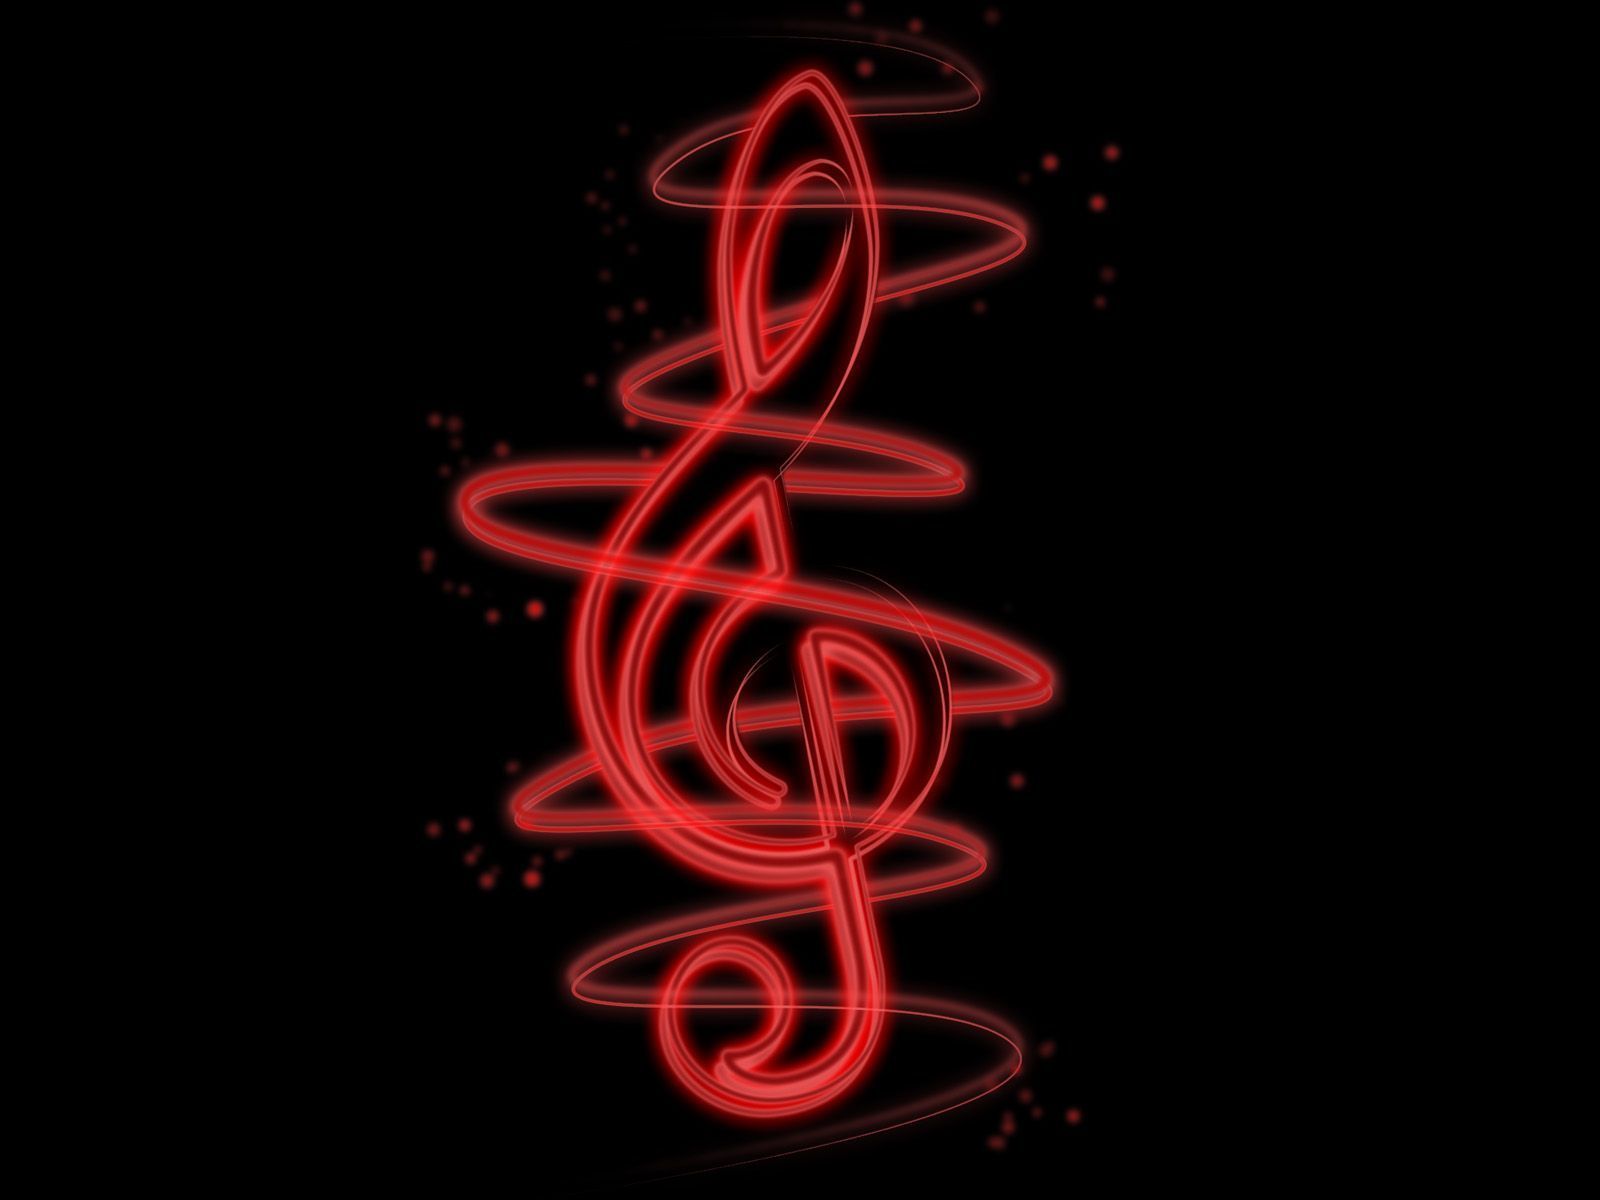 Wallpaper #331 Treble clef | Red and Black Wallpapers